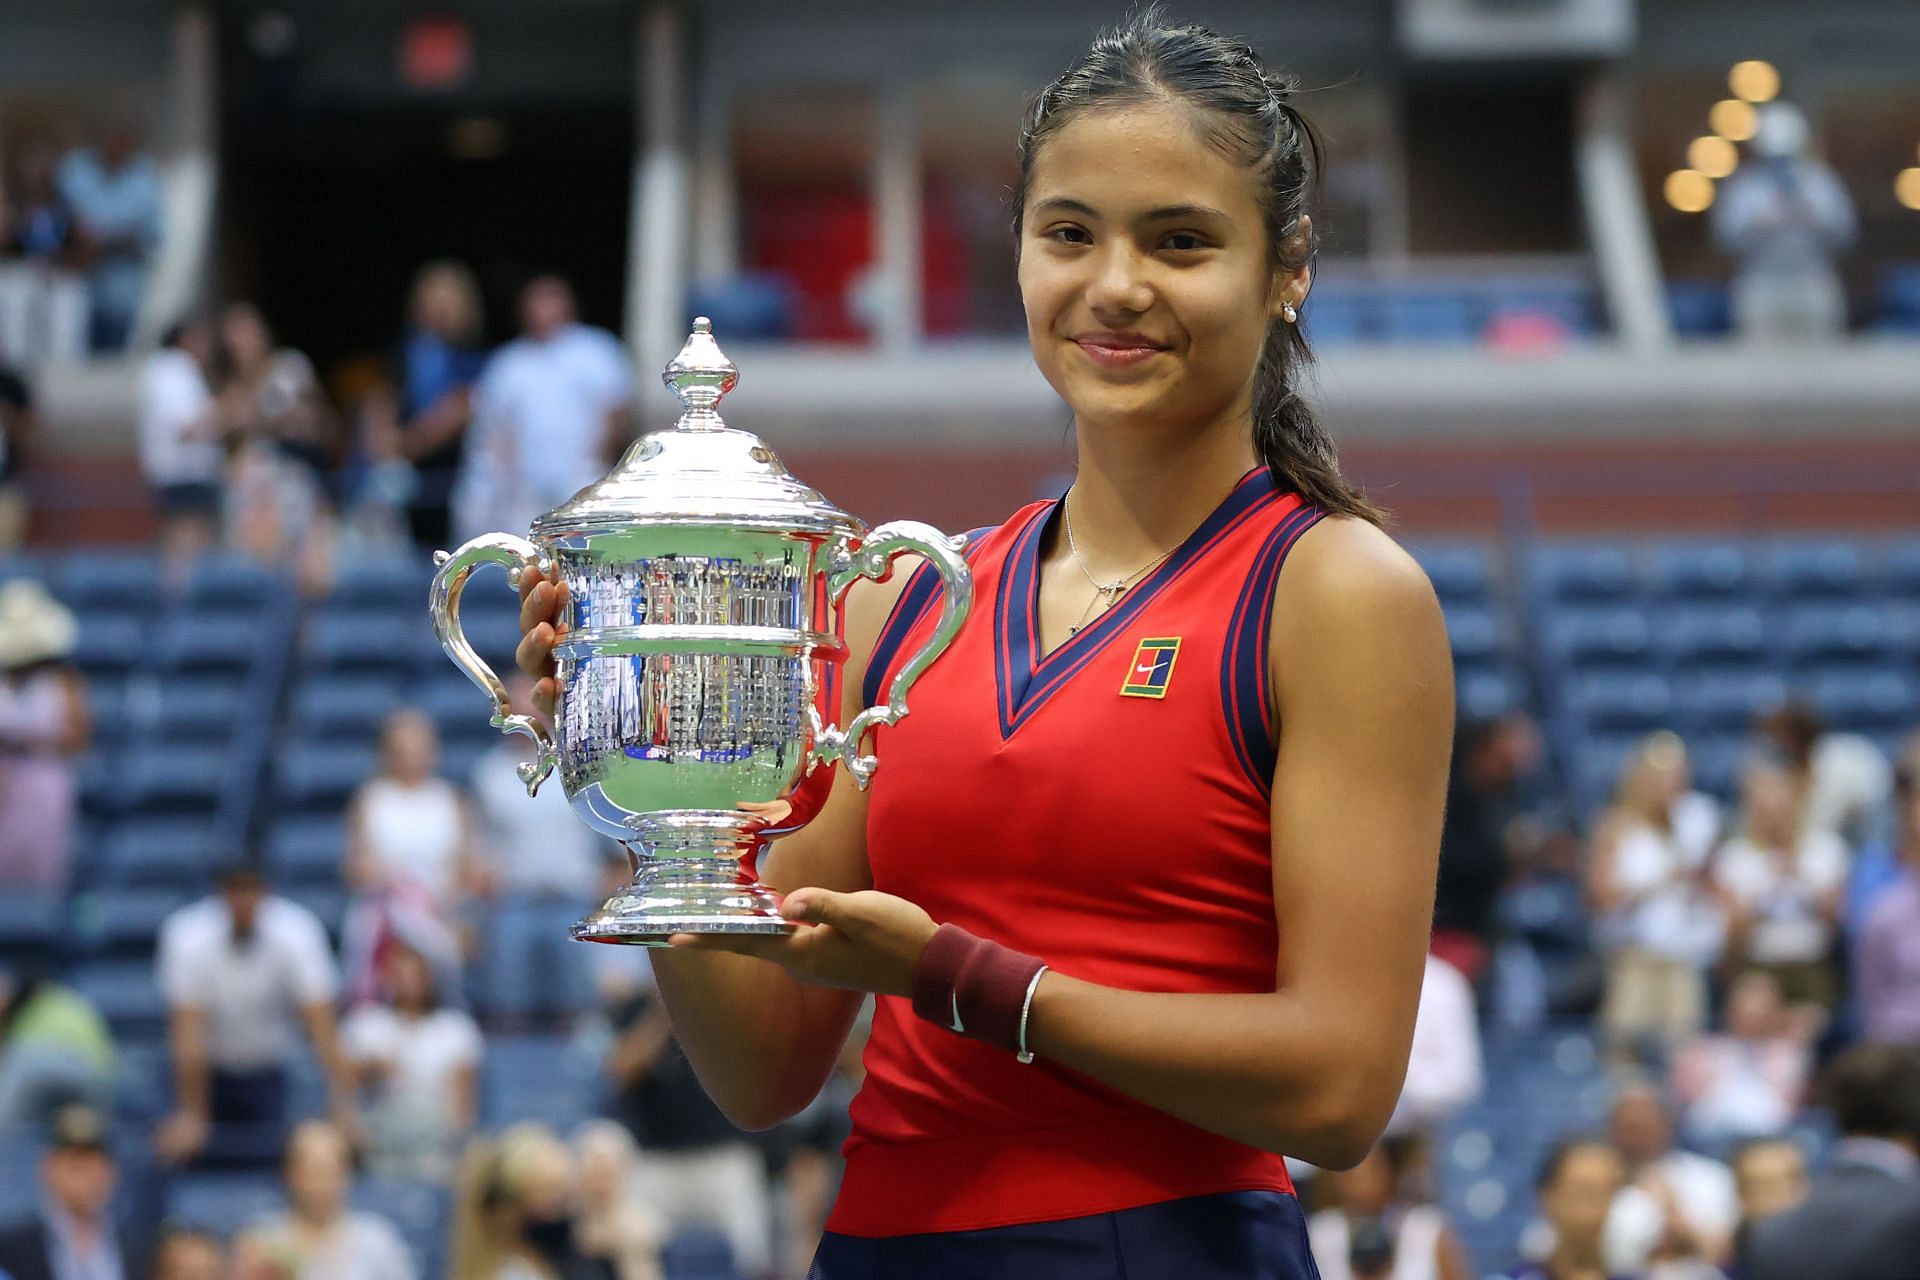 Emma Raducanu made history by winning the US Open title on debut